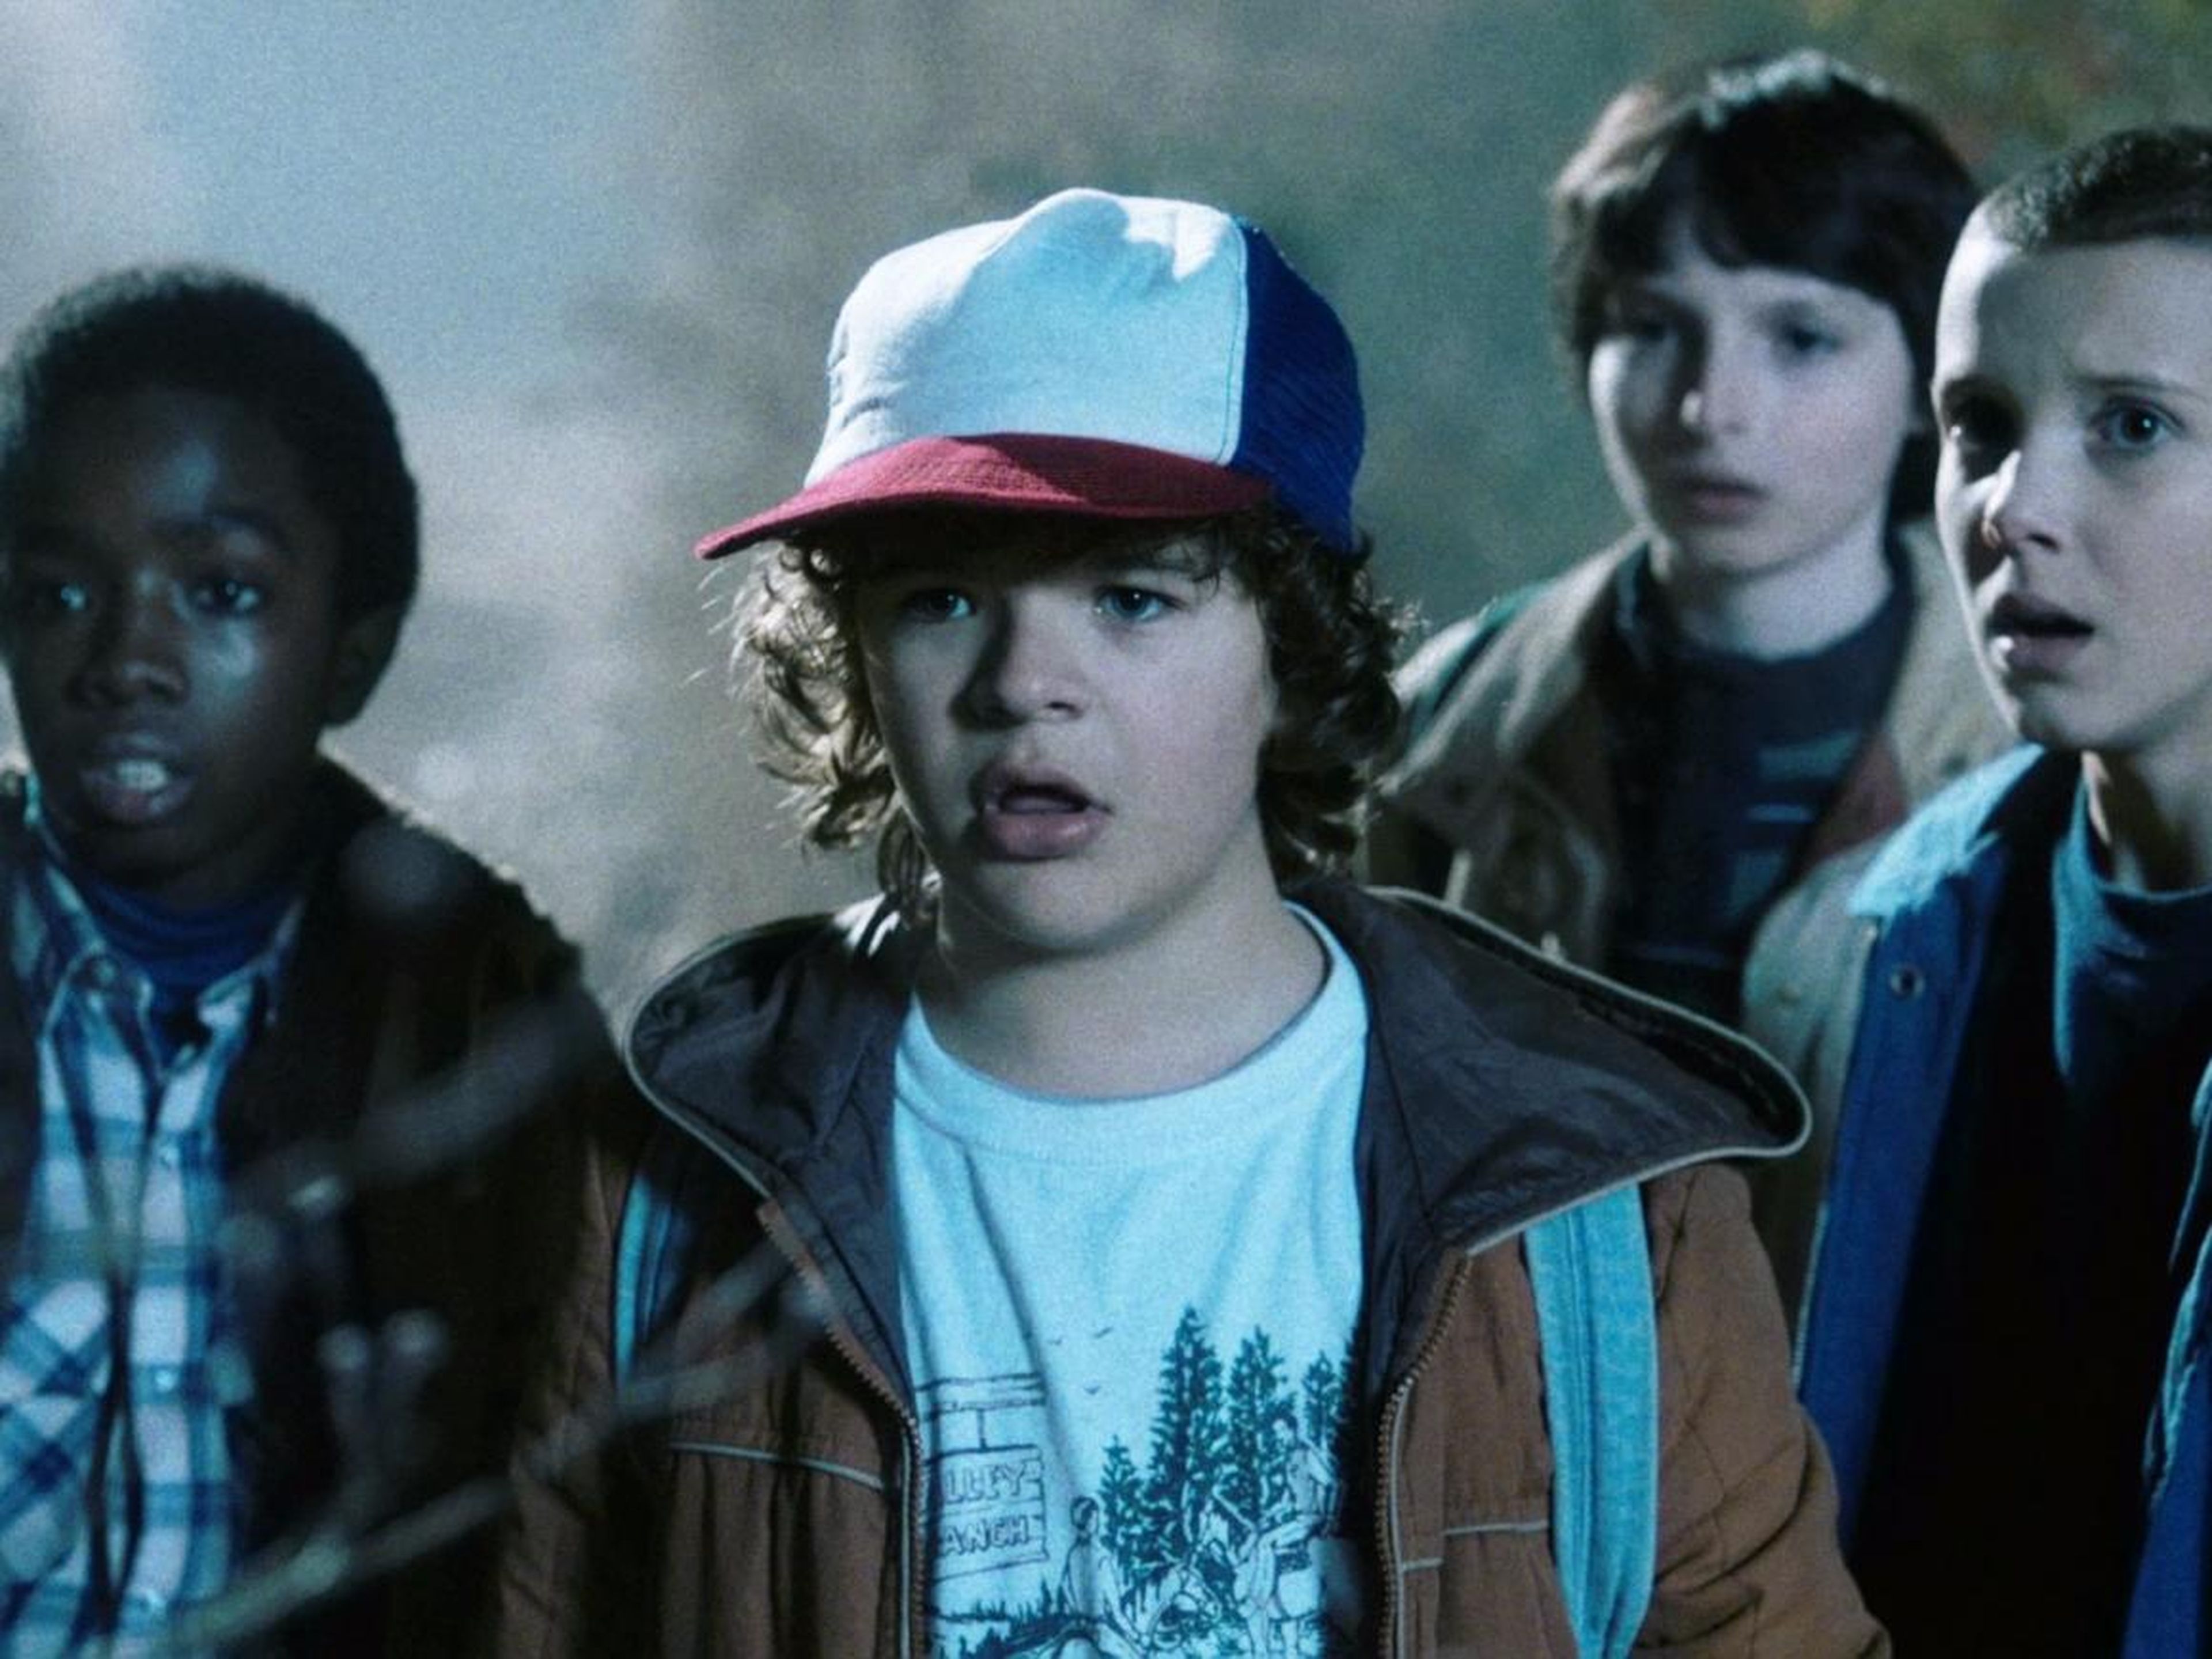 "Stranger Things" continues to be a fan favorite.